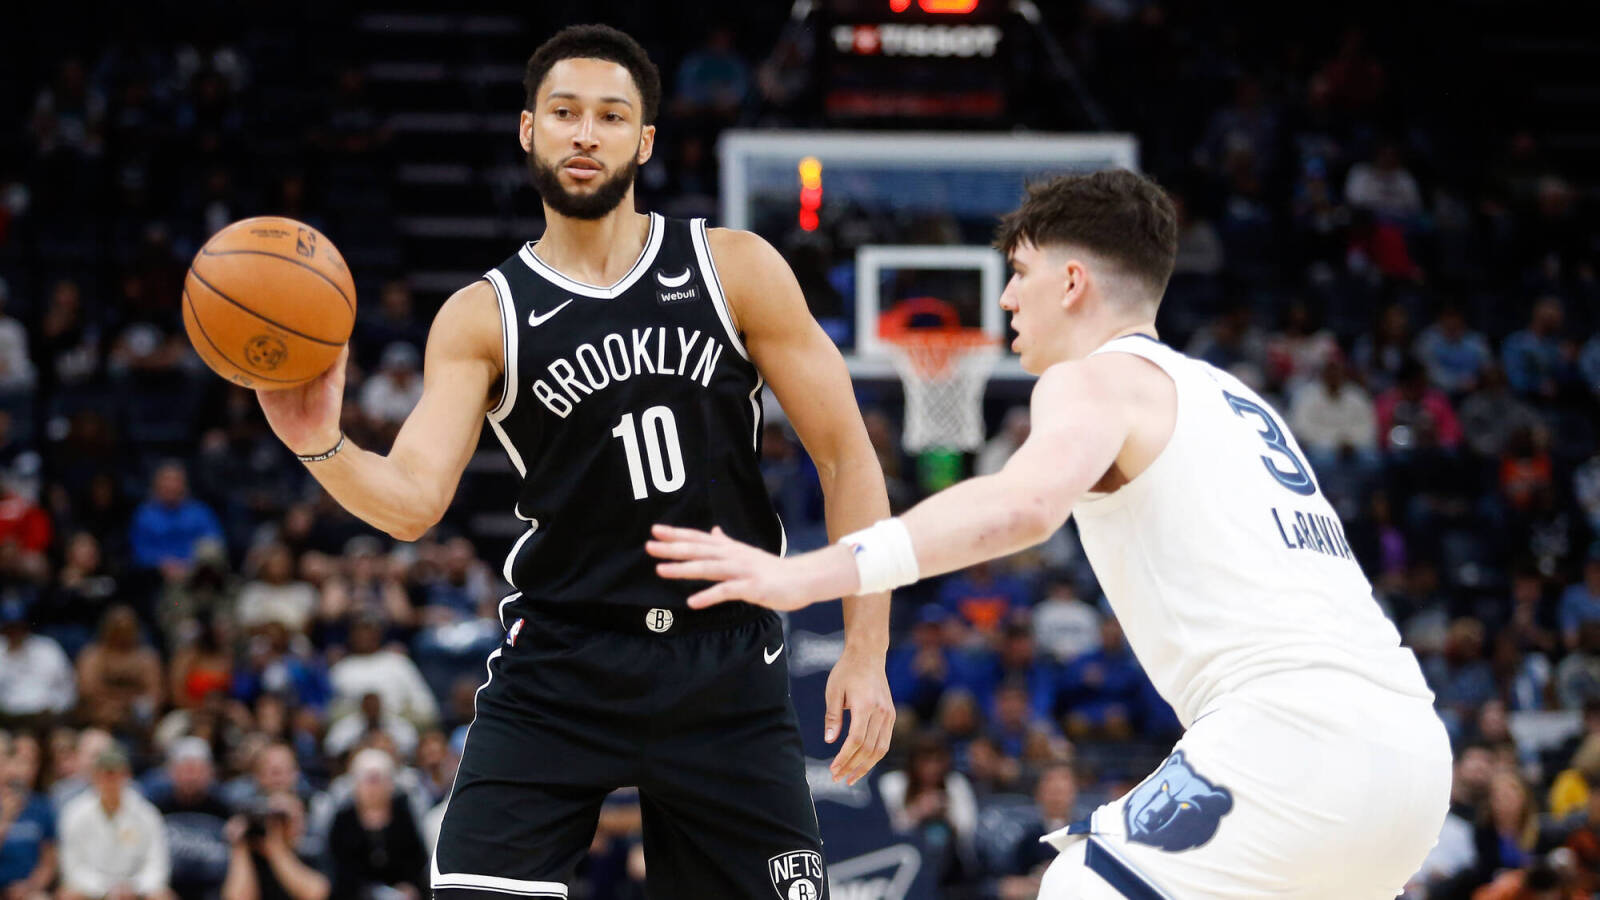 Ben Simmons' season-ending surgery gives Nets a lot to think about